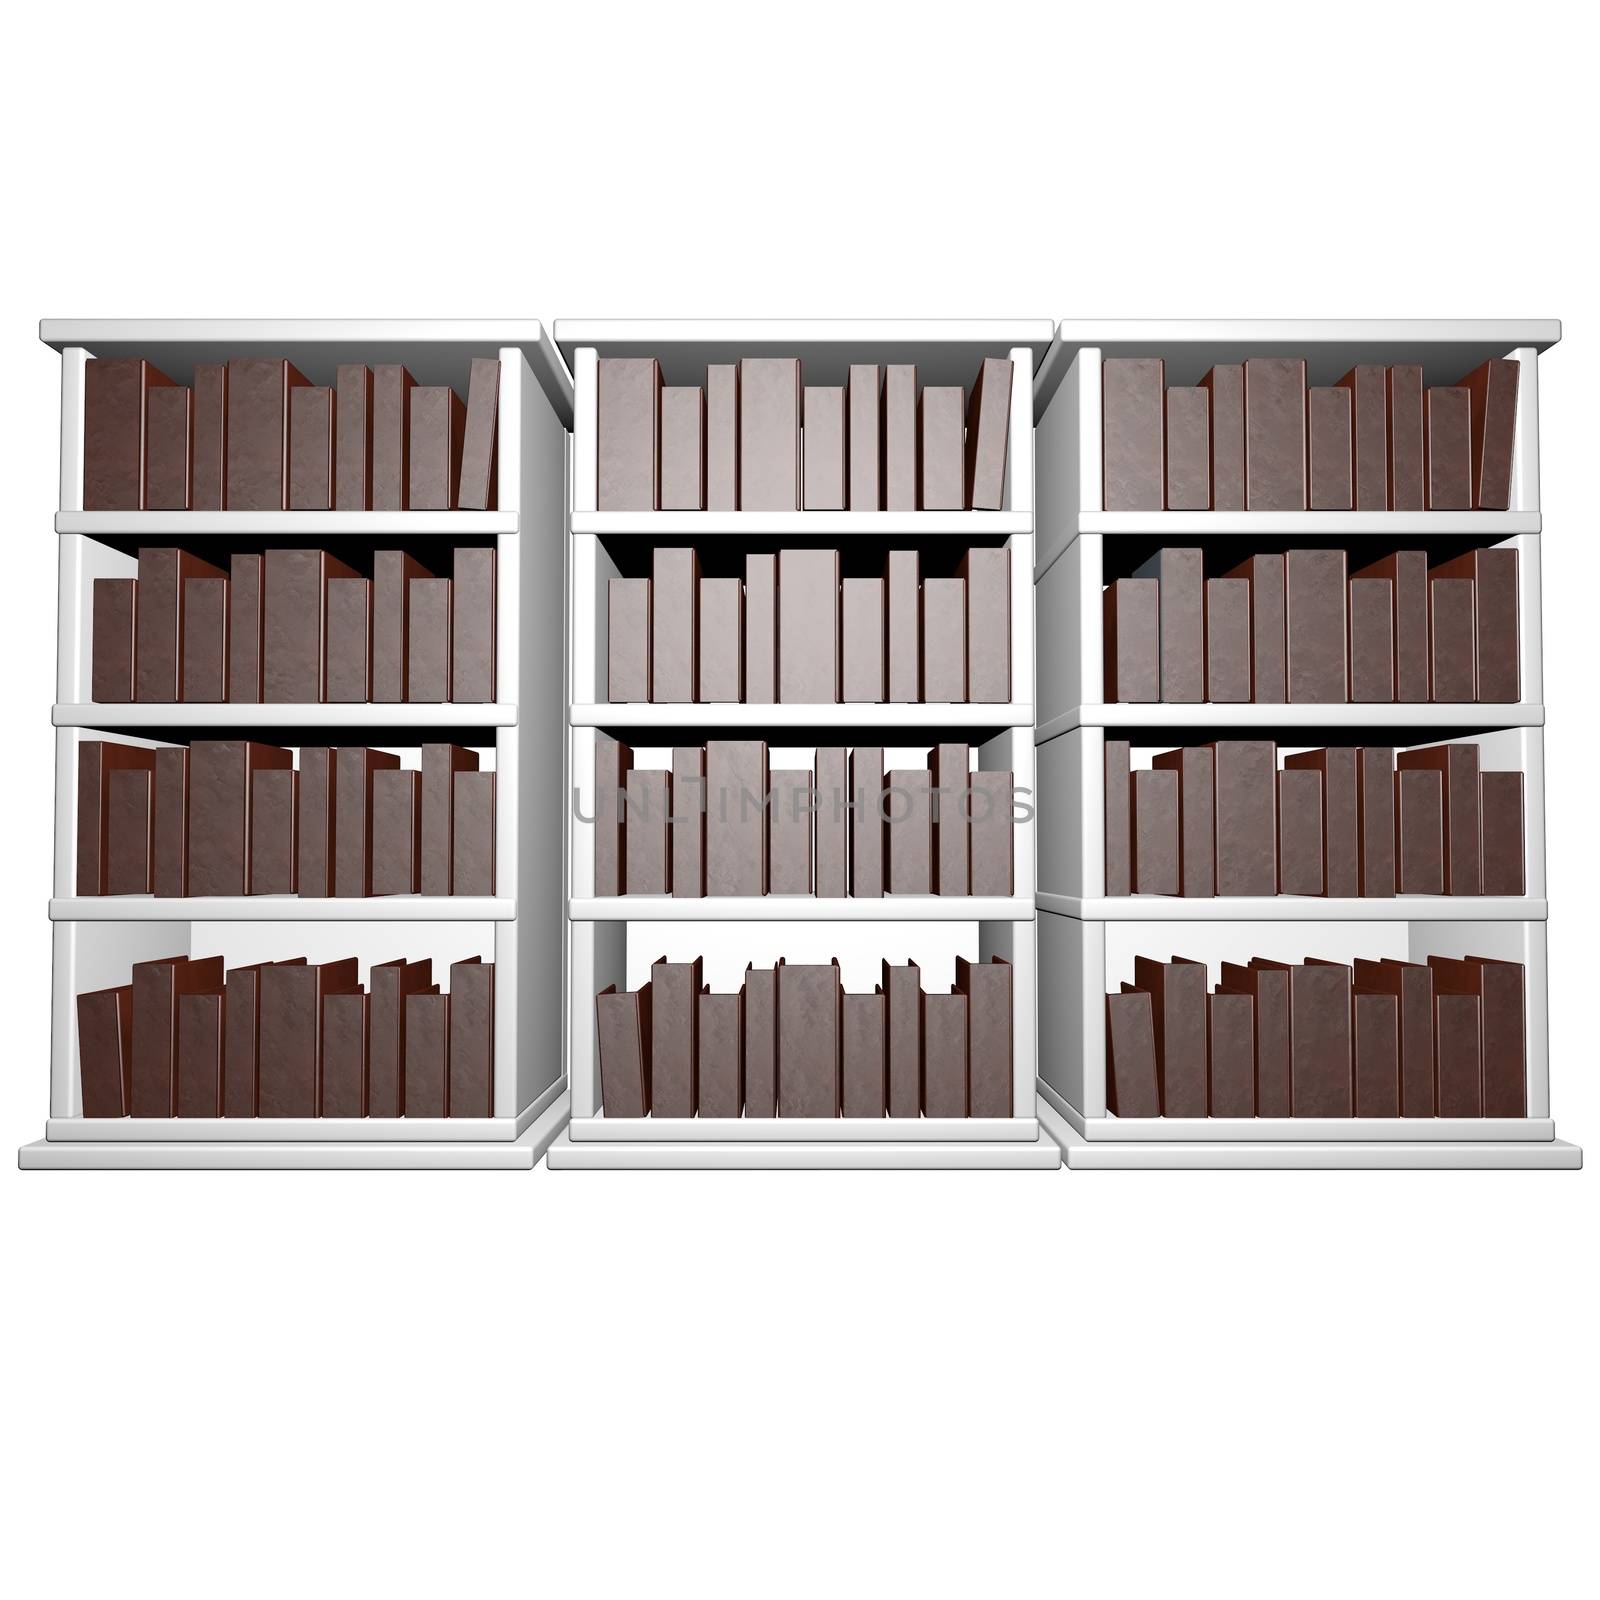 Libraries in a row, isolated over white, 3d render